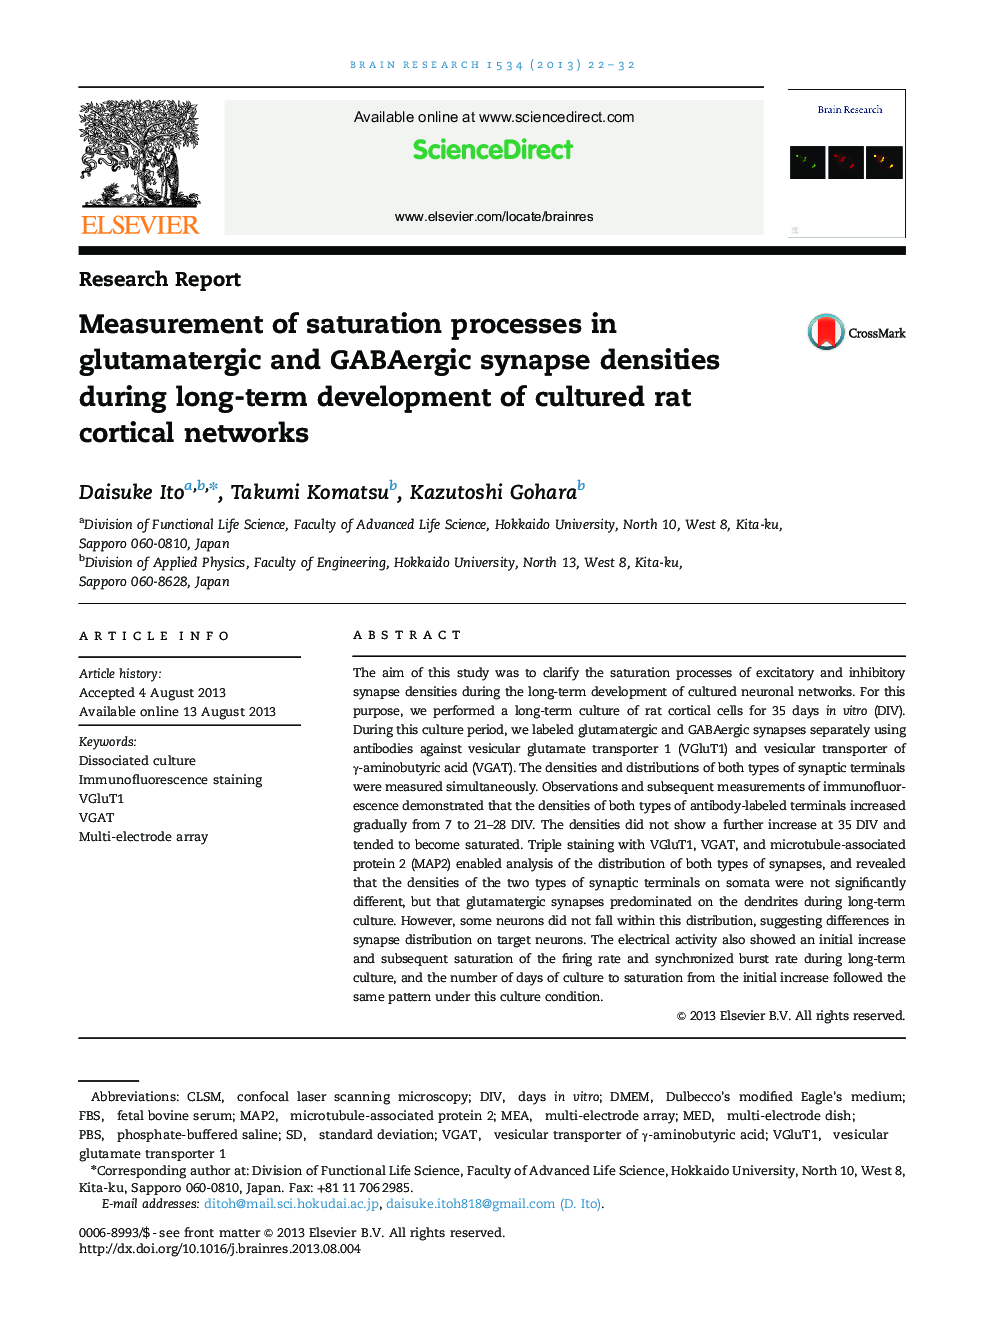 Research ReportMeasurement of saturation processes in glutamatergic and GABAergic synapse densities during long-term development of cultured rat cortical networks